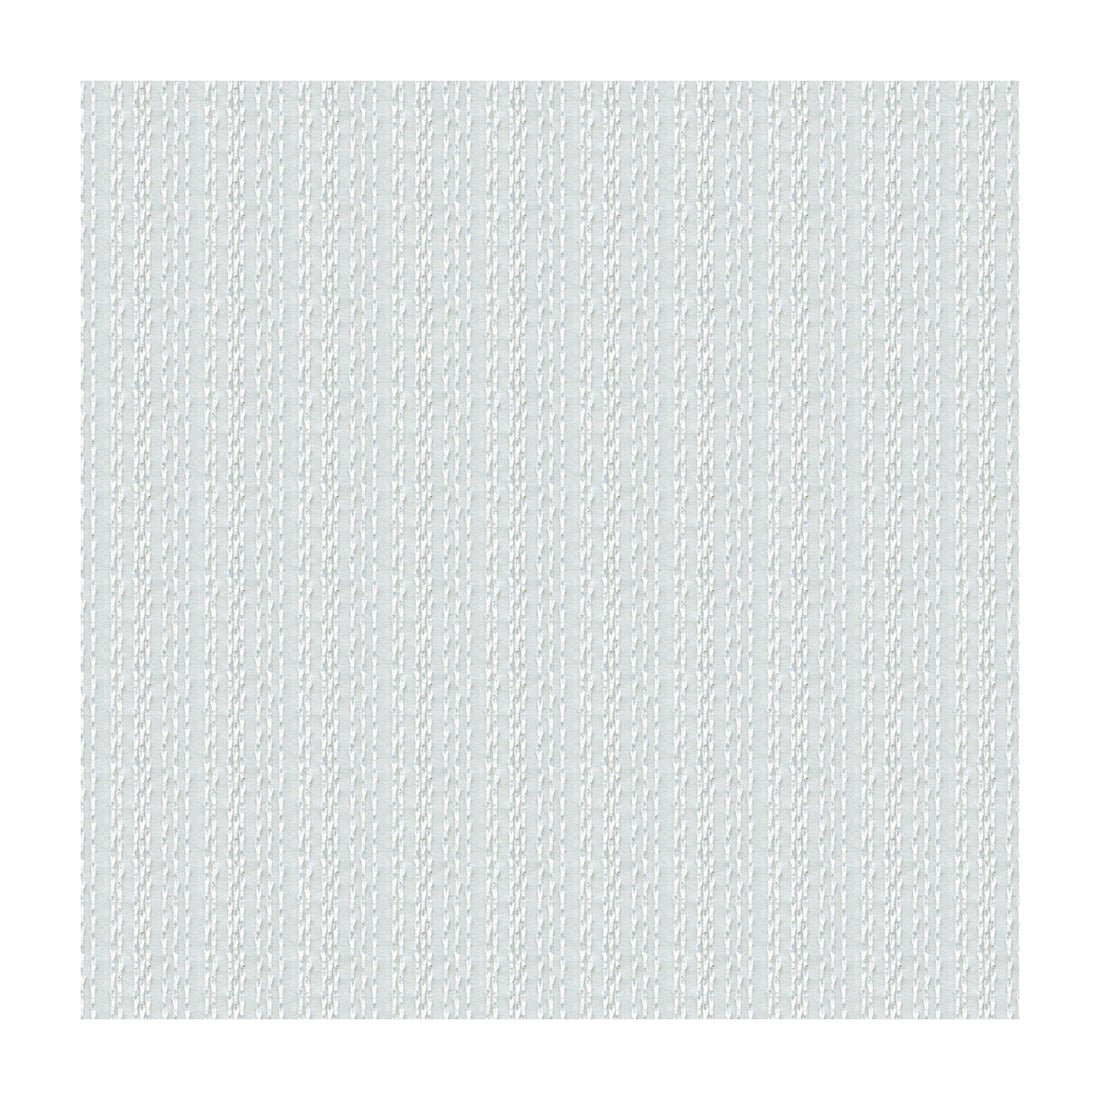 Kravet Contract fabric in 4139-101 color - pattern 4139.101.0 - by Kravet Contract